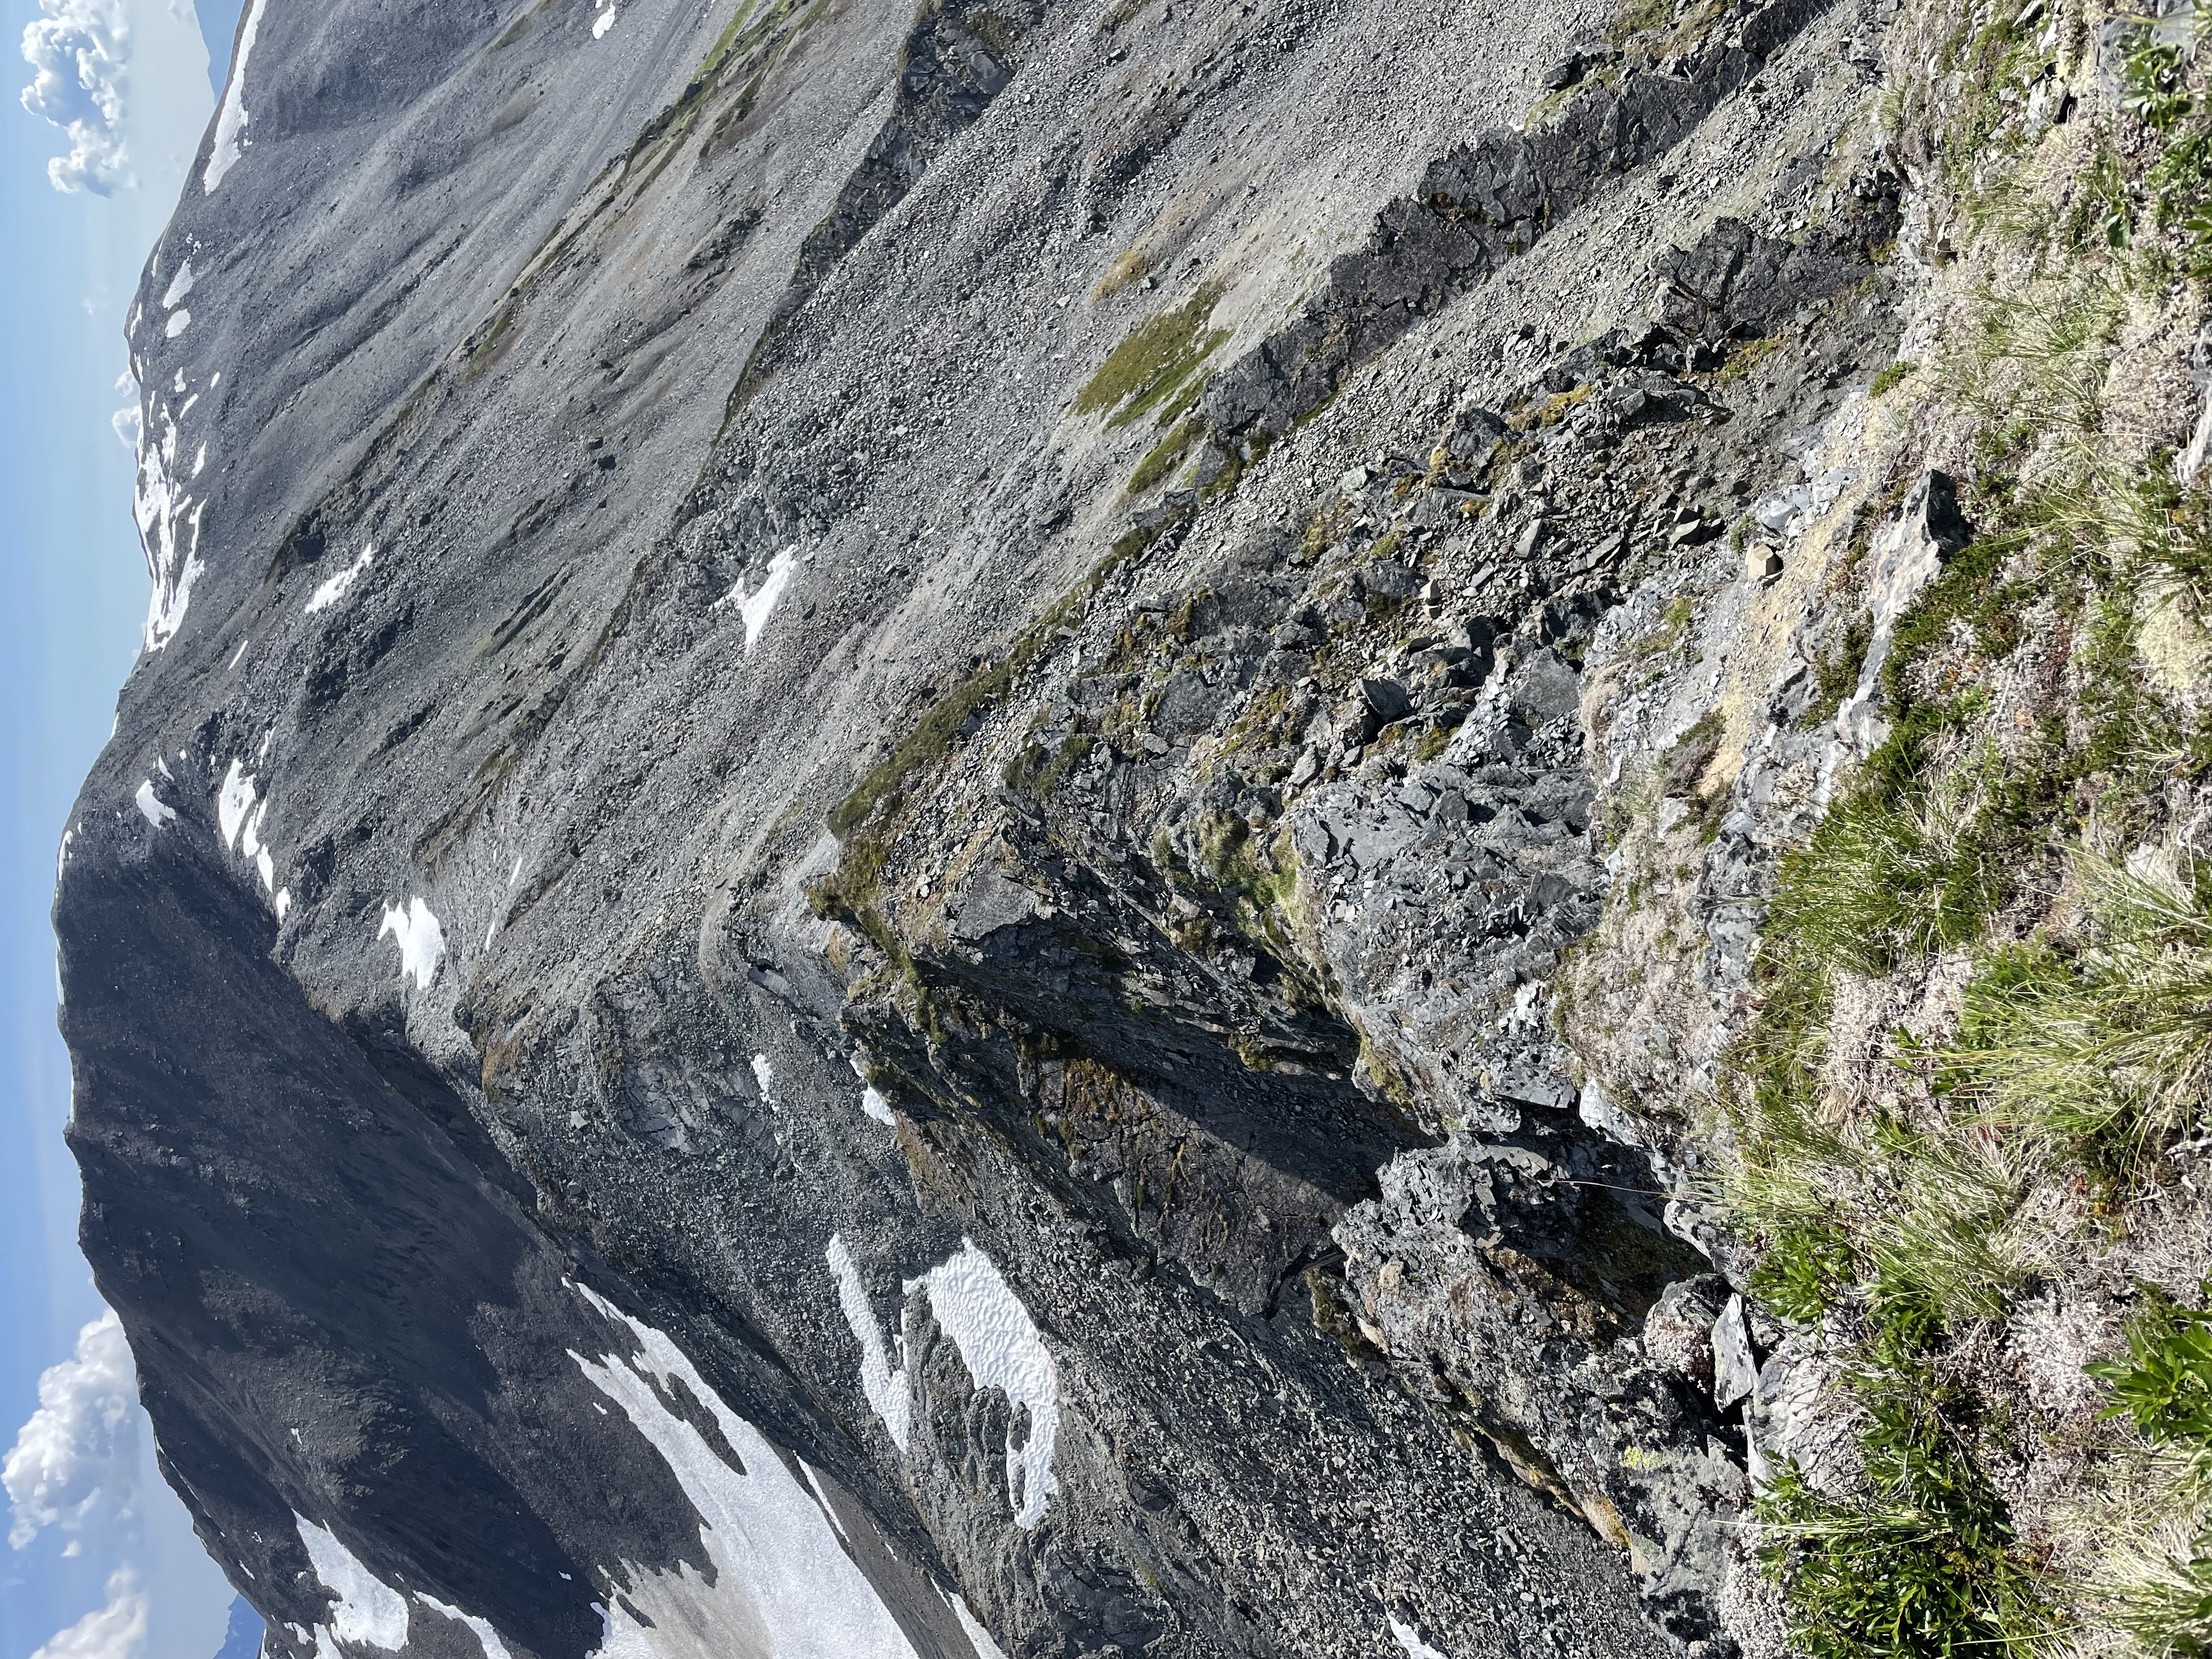 A steep, knife-edged ridgeline covered with scree and patches of snow.